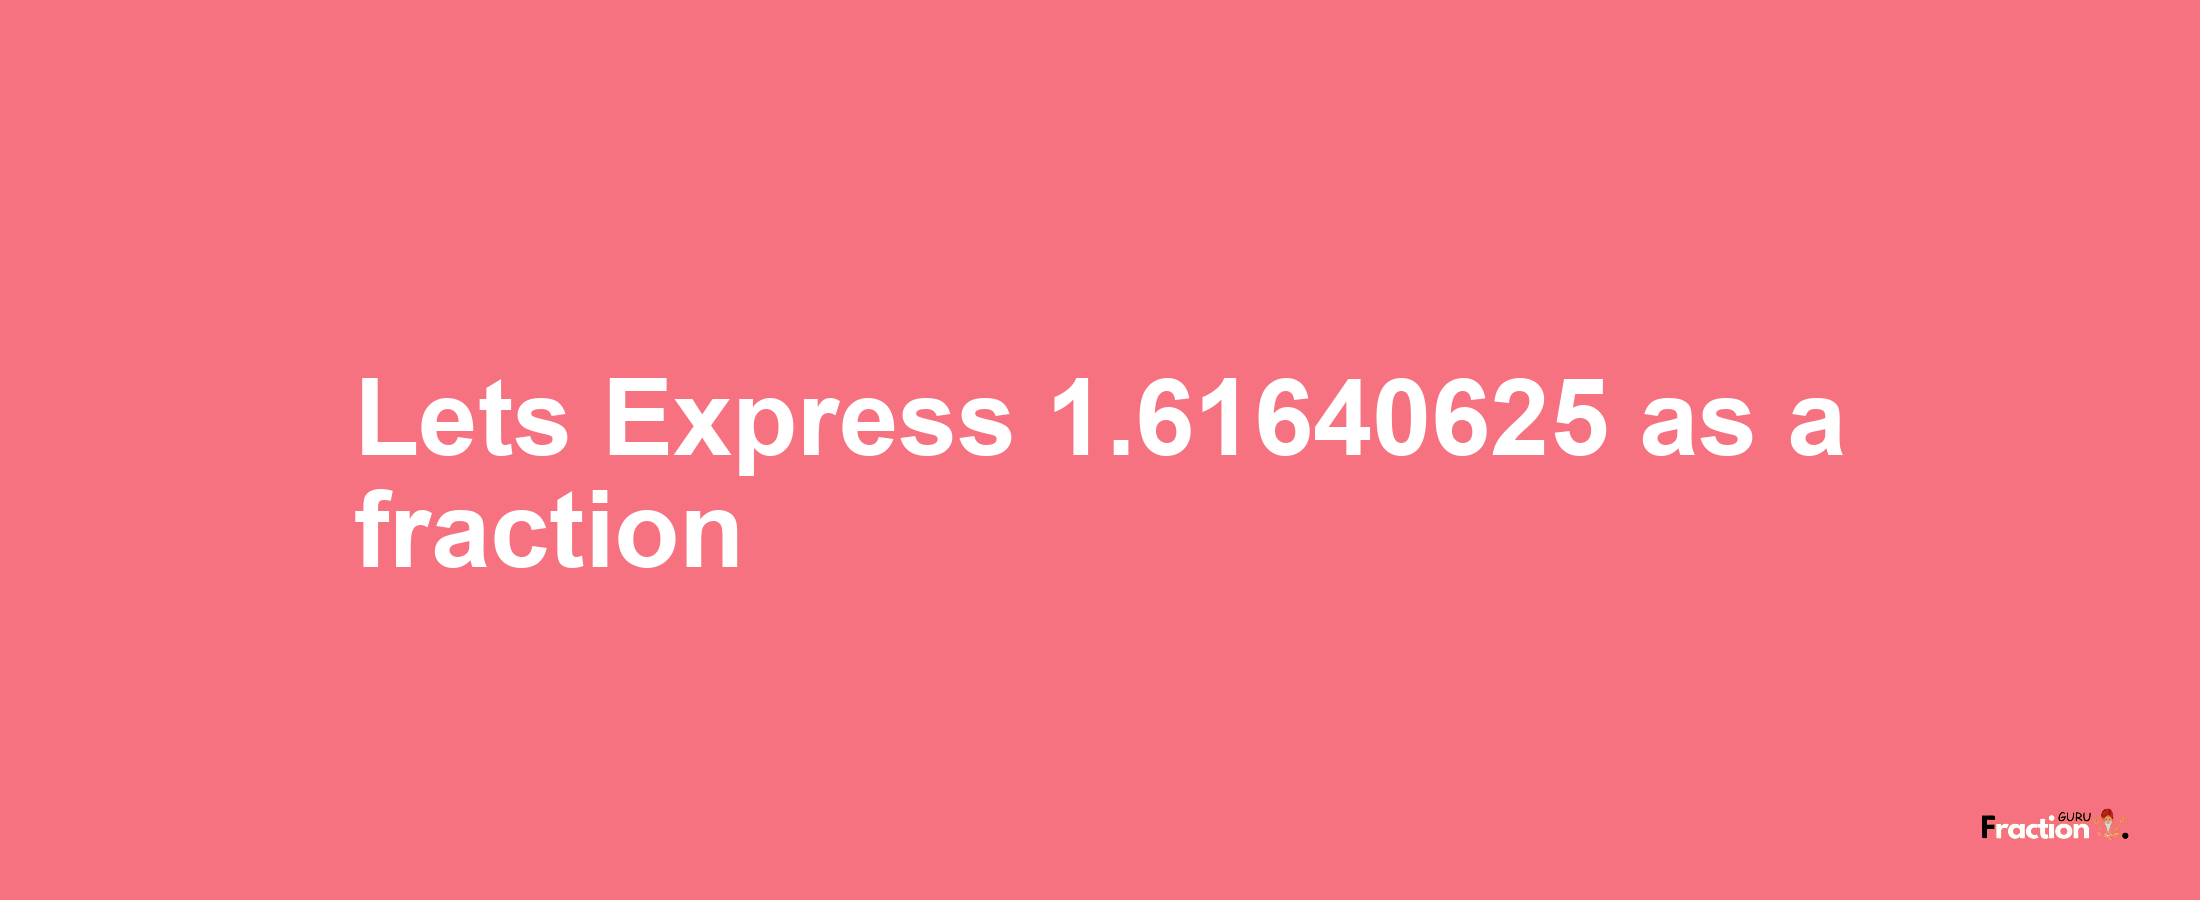 Lets Express 1.61640625 as afraction